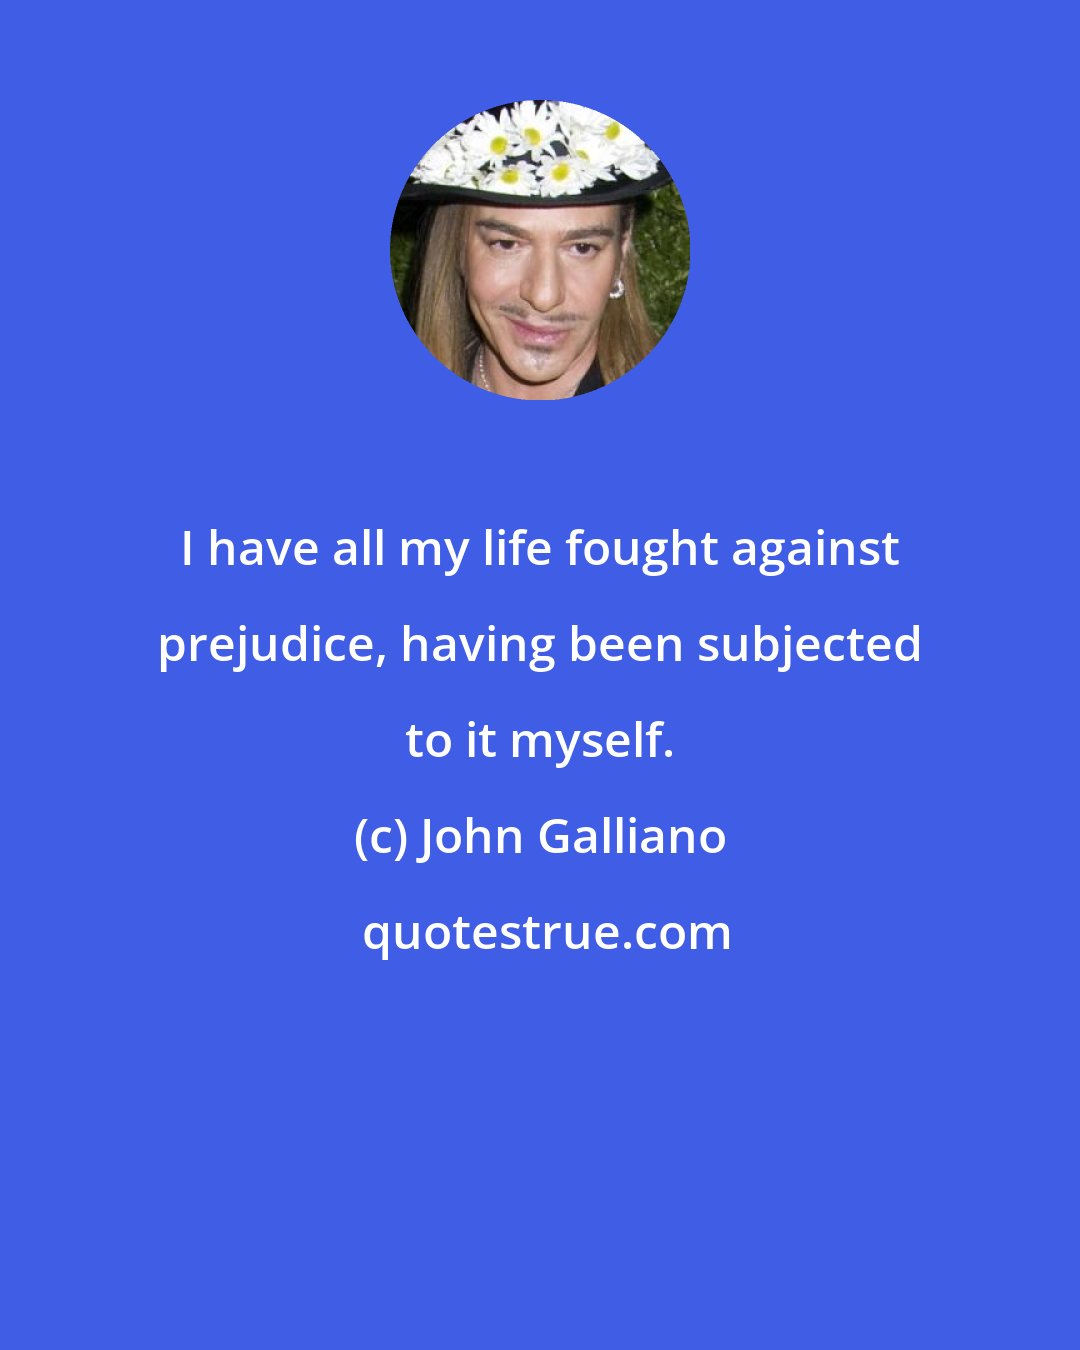 John Galliano: I have all my life fought against prejudice, having been subjected to it myself.